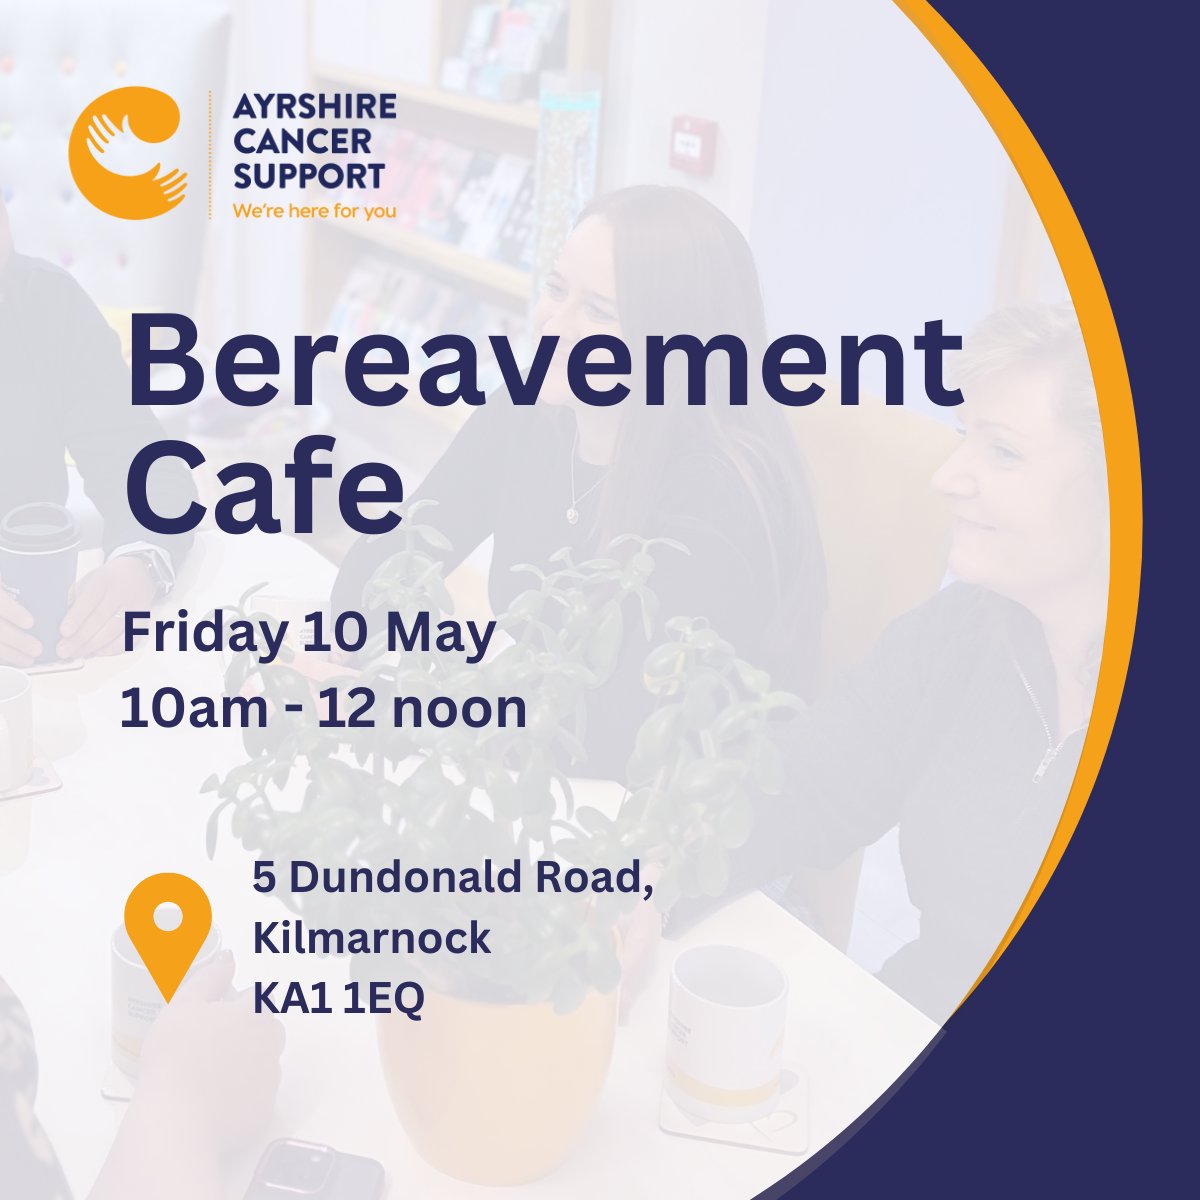 Our next drop-in bereavement café takes place tomorrow morning (Fri 10 May), providing an opportunity for people who are navigating loss & grief from cancer to access peer support. There is no cost to attend & no need to register - please feel free to pop in & see us 🧡